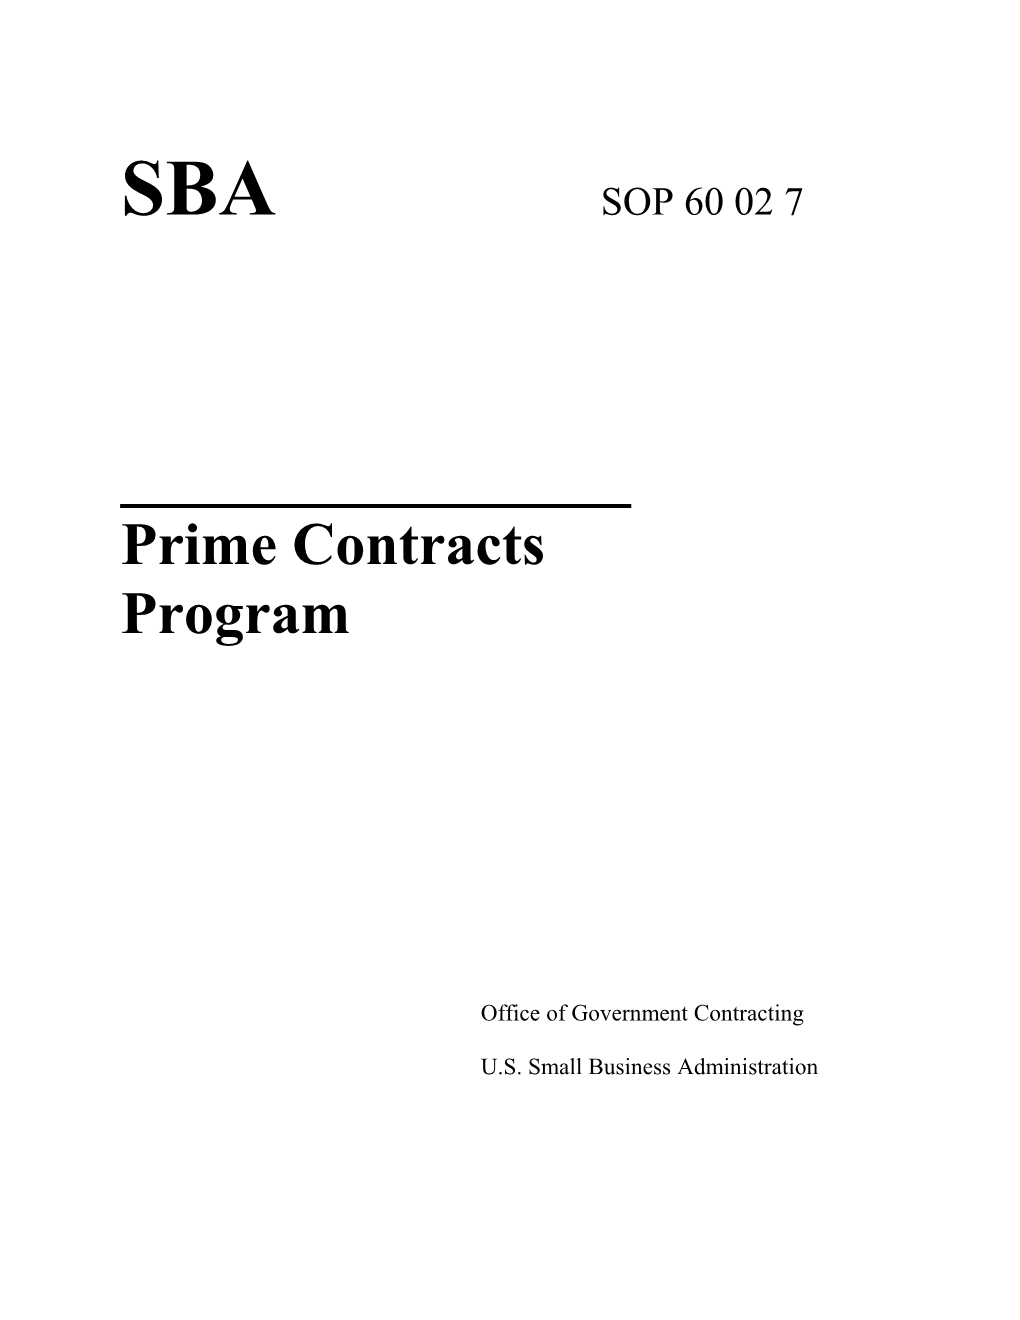 Prime Contracts